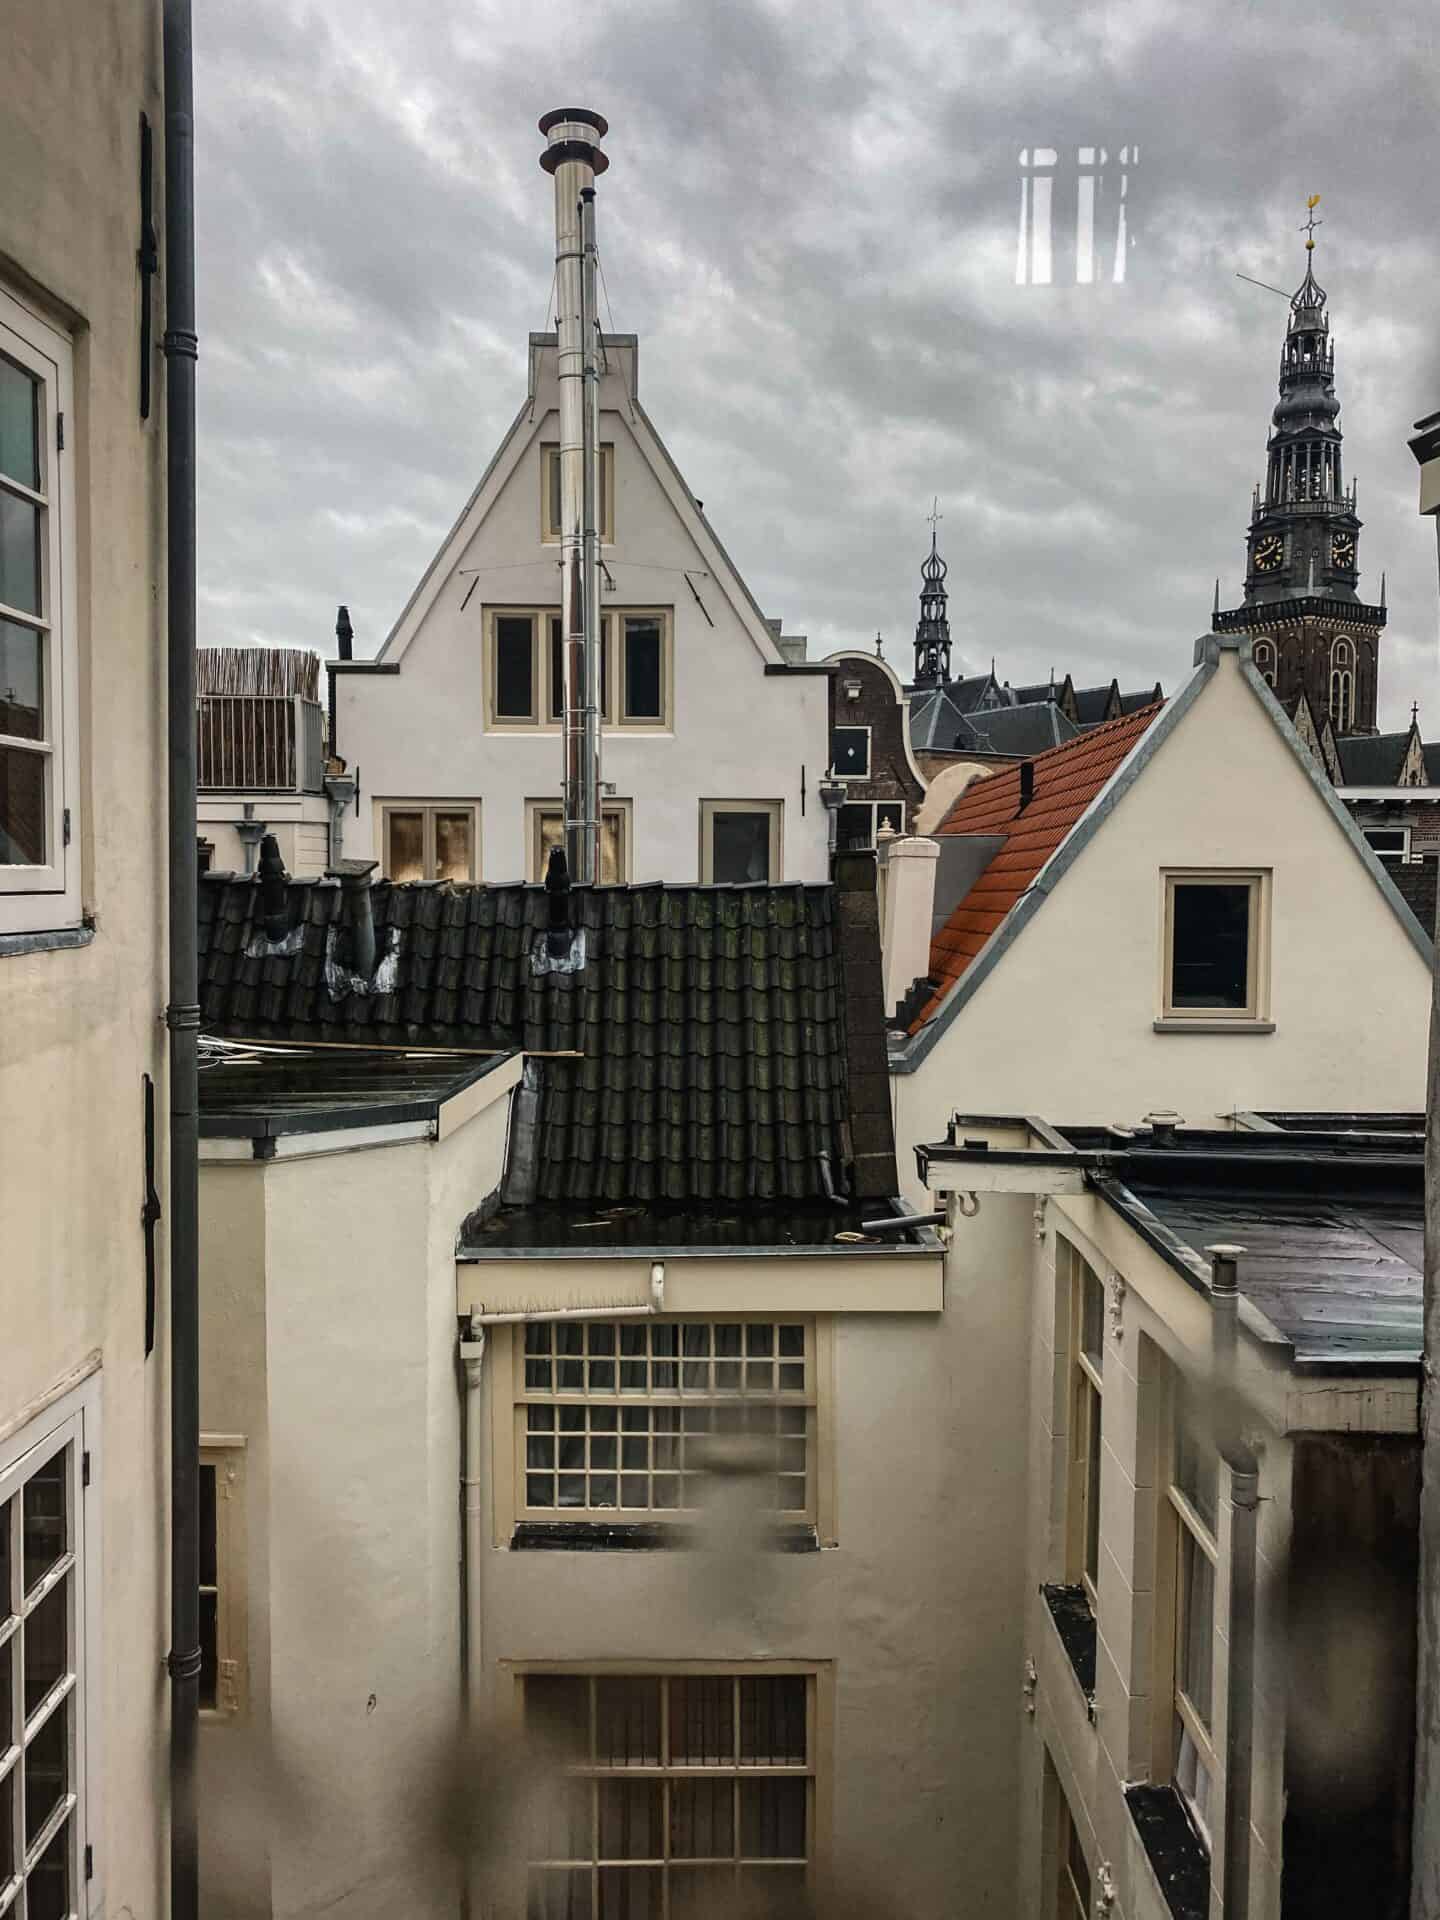 View of Amsterdam through a window on a cloudy day